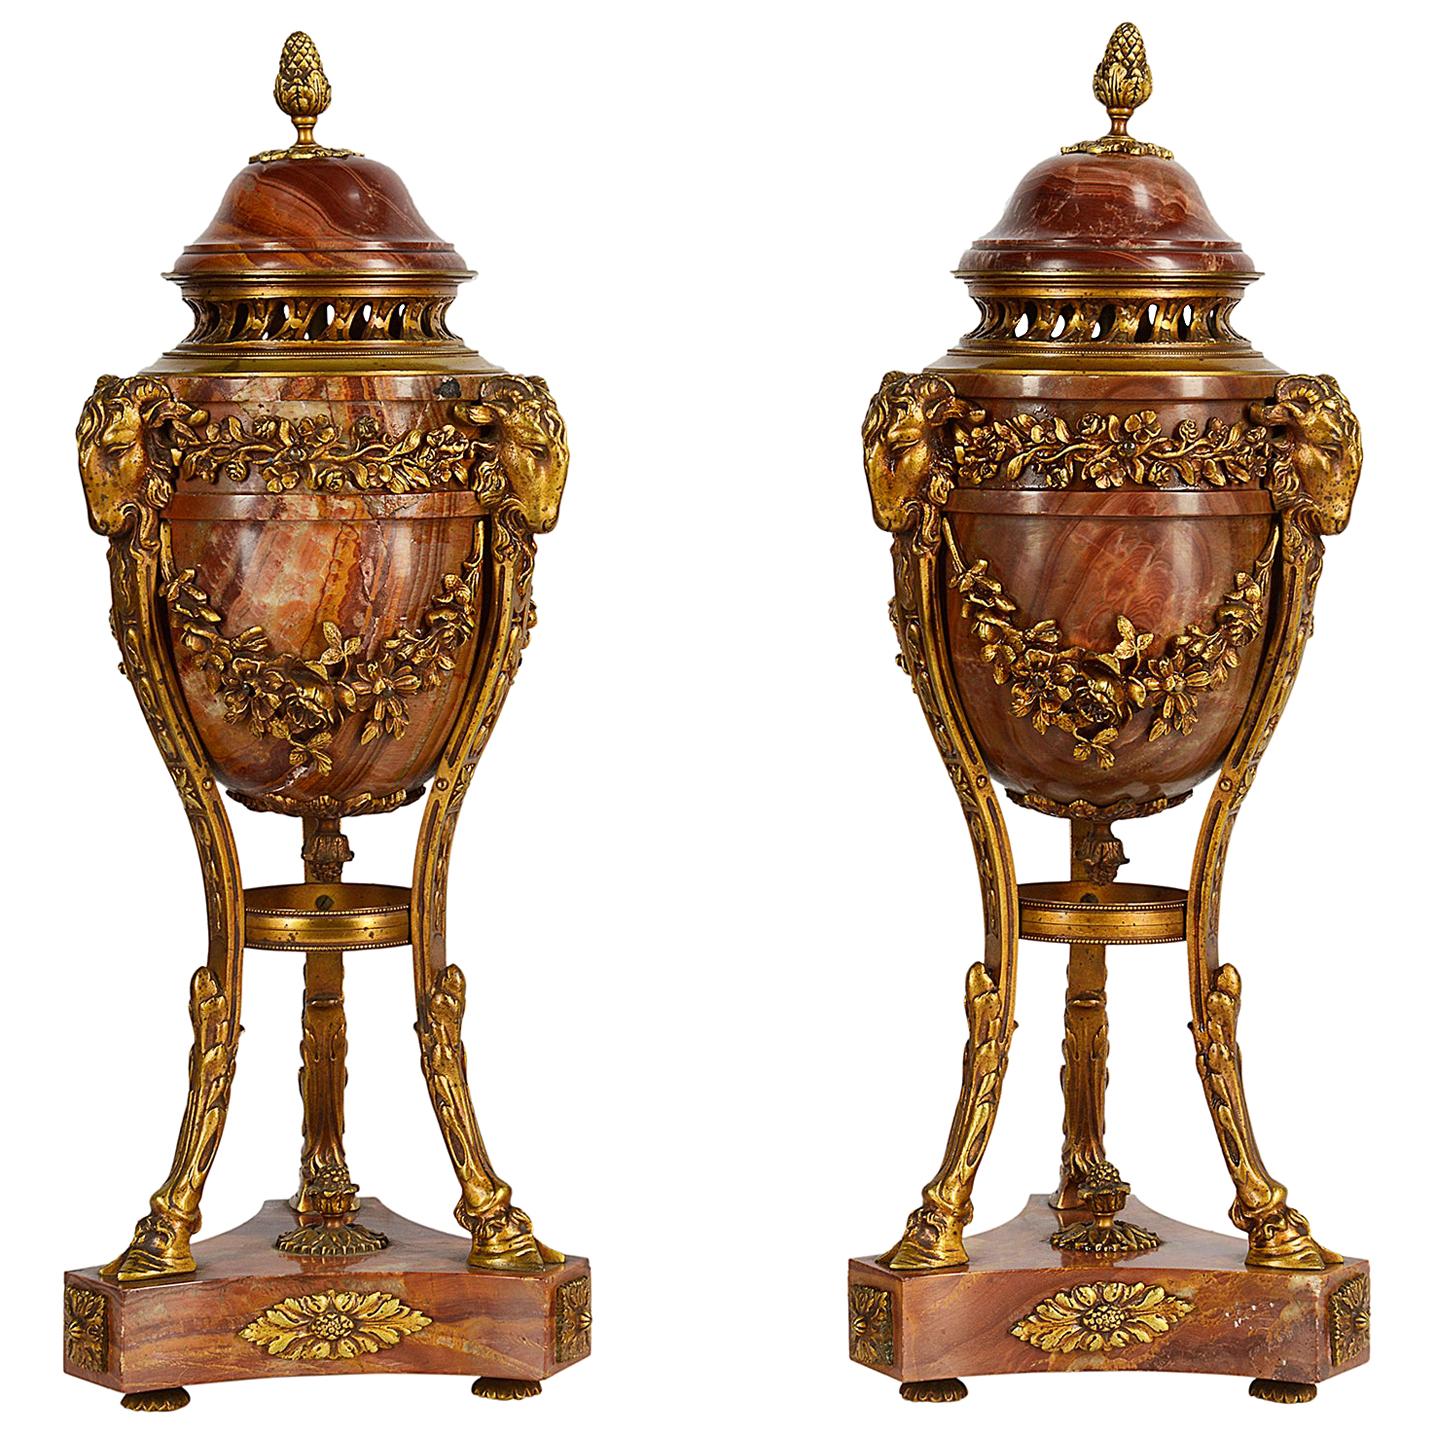 Pair of 19th Century Marble and Ormolu Urns